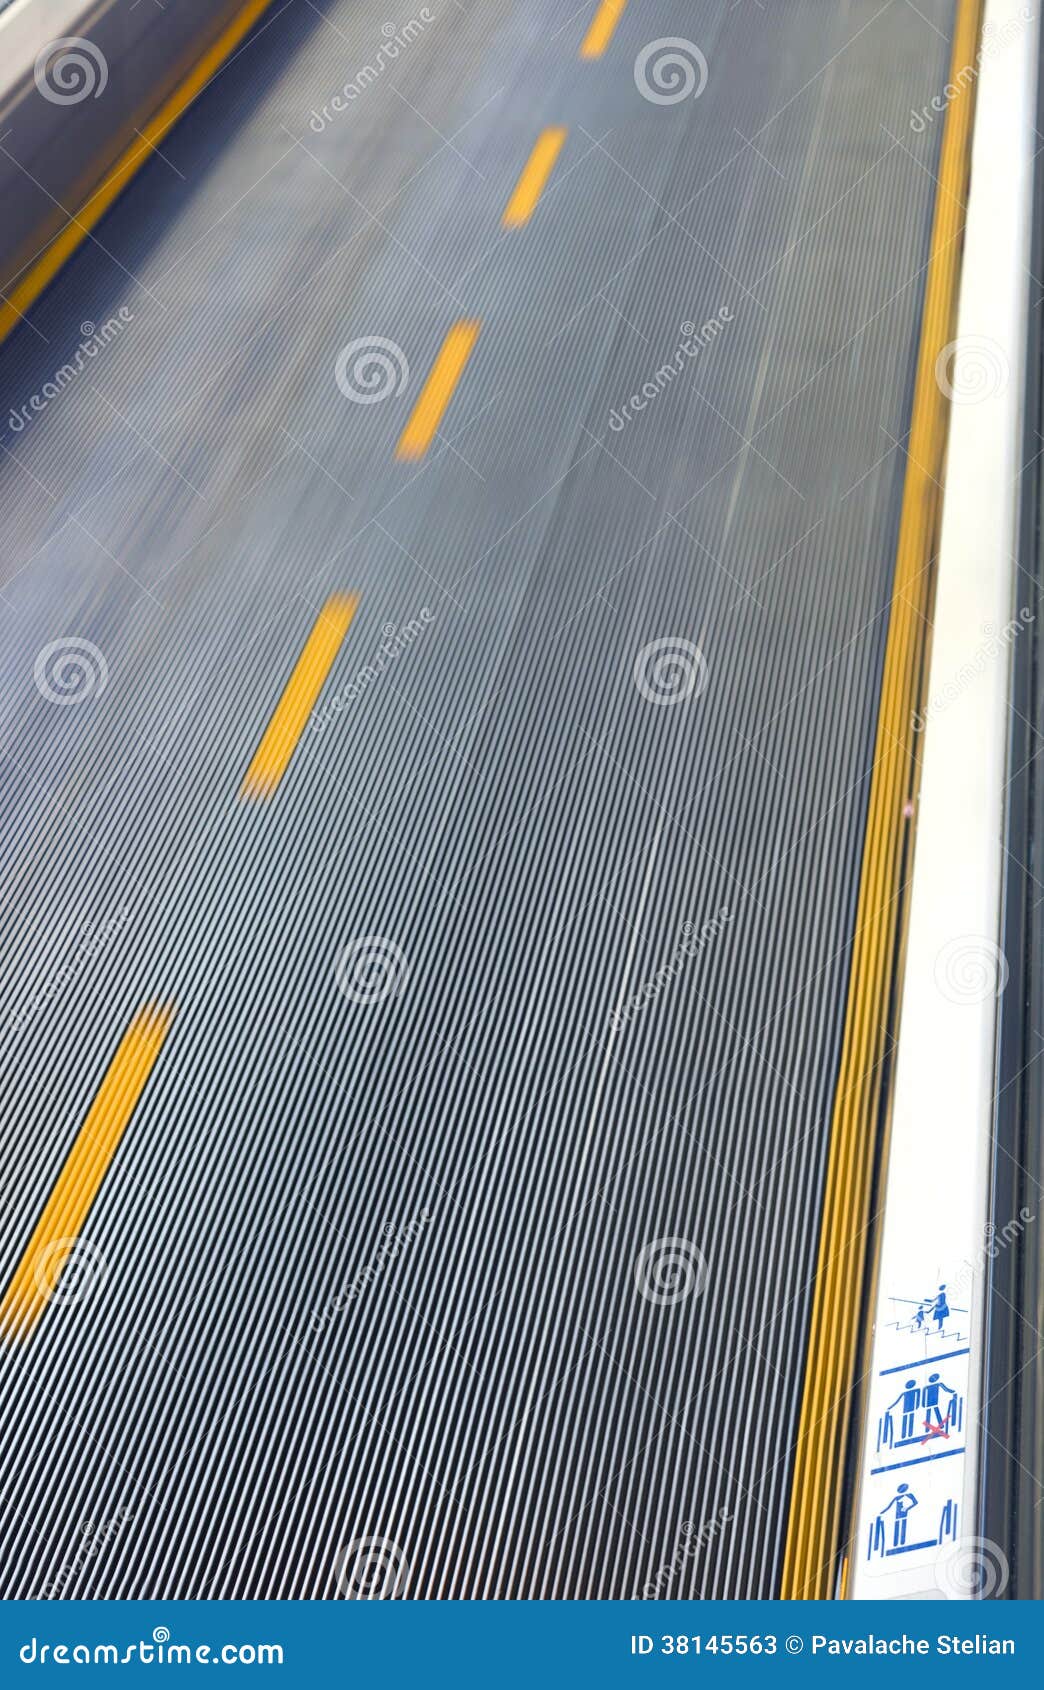 Conveyor Safety Signs at Airport Stock Image - Image of system ...